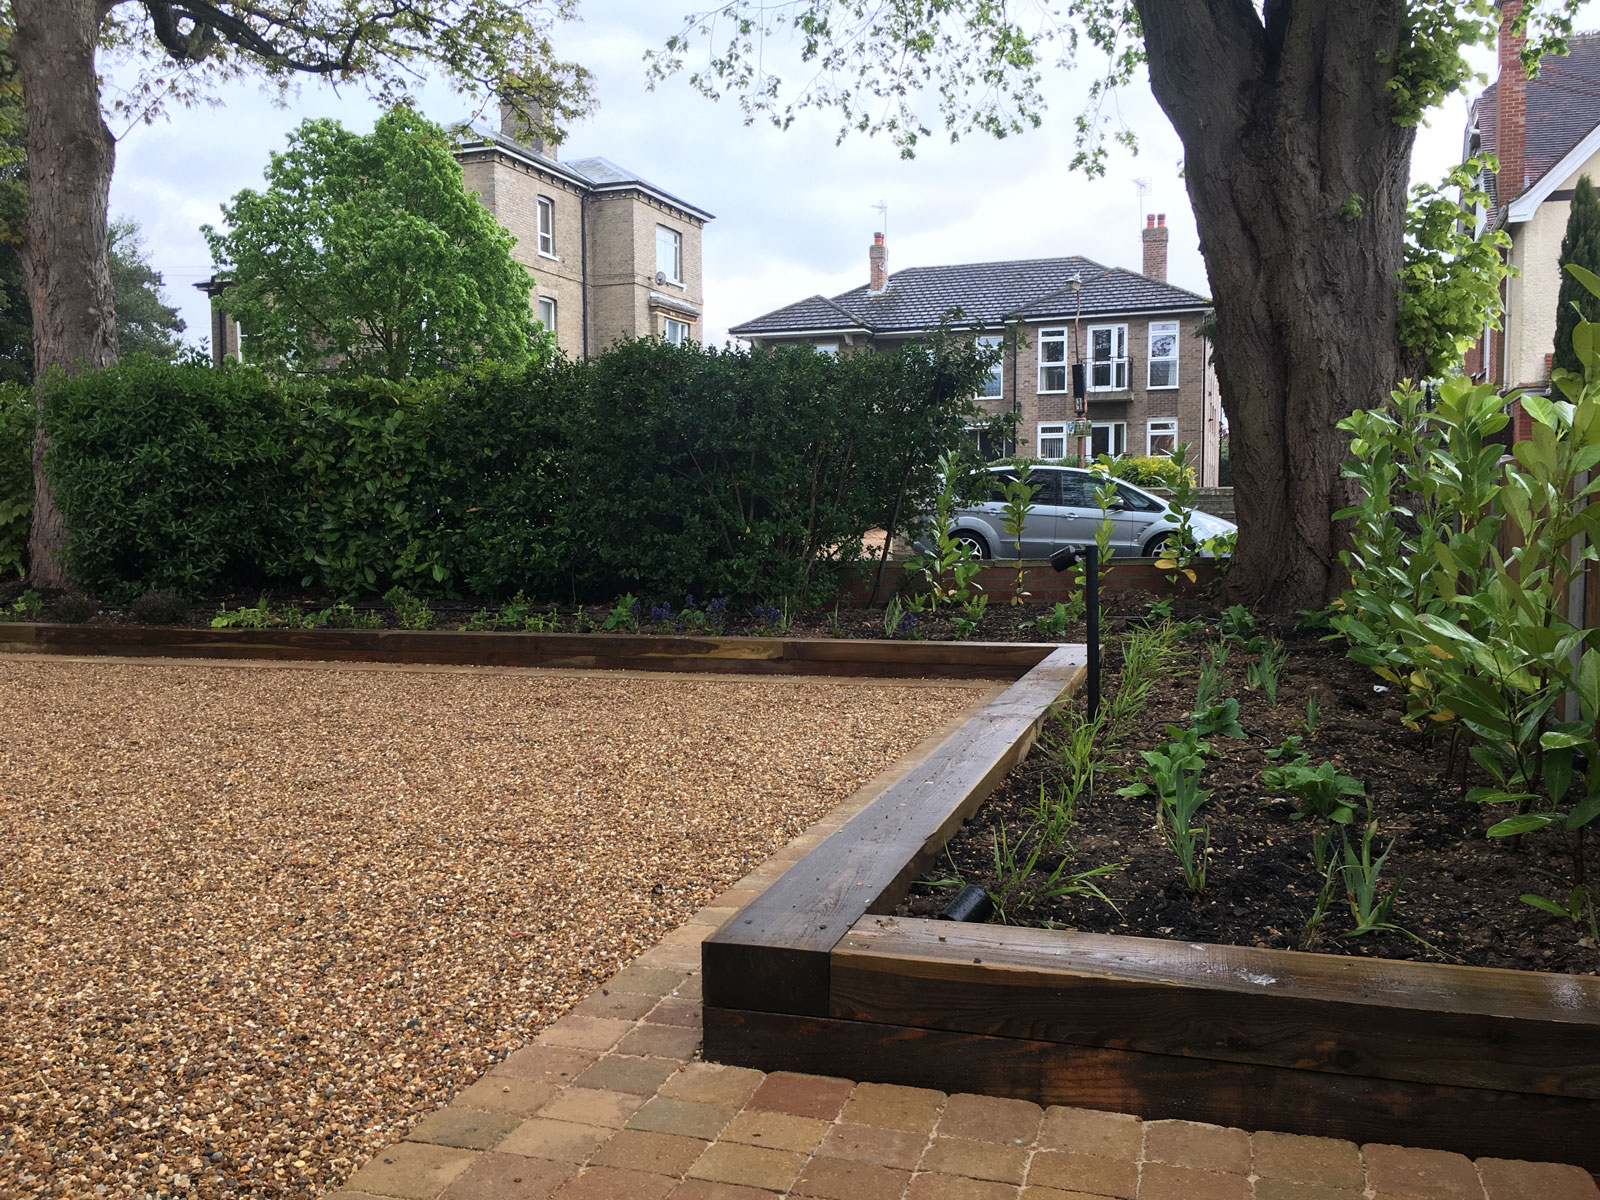 driveway design with deep timber edging and a border of sandstone pavers around gravel parking area